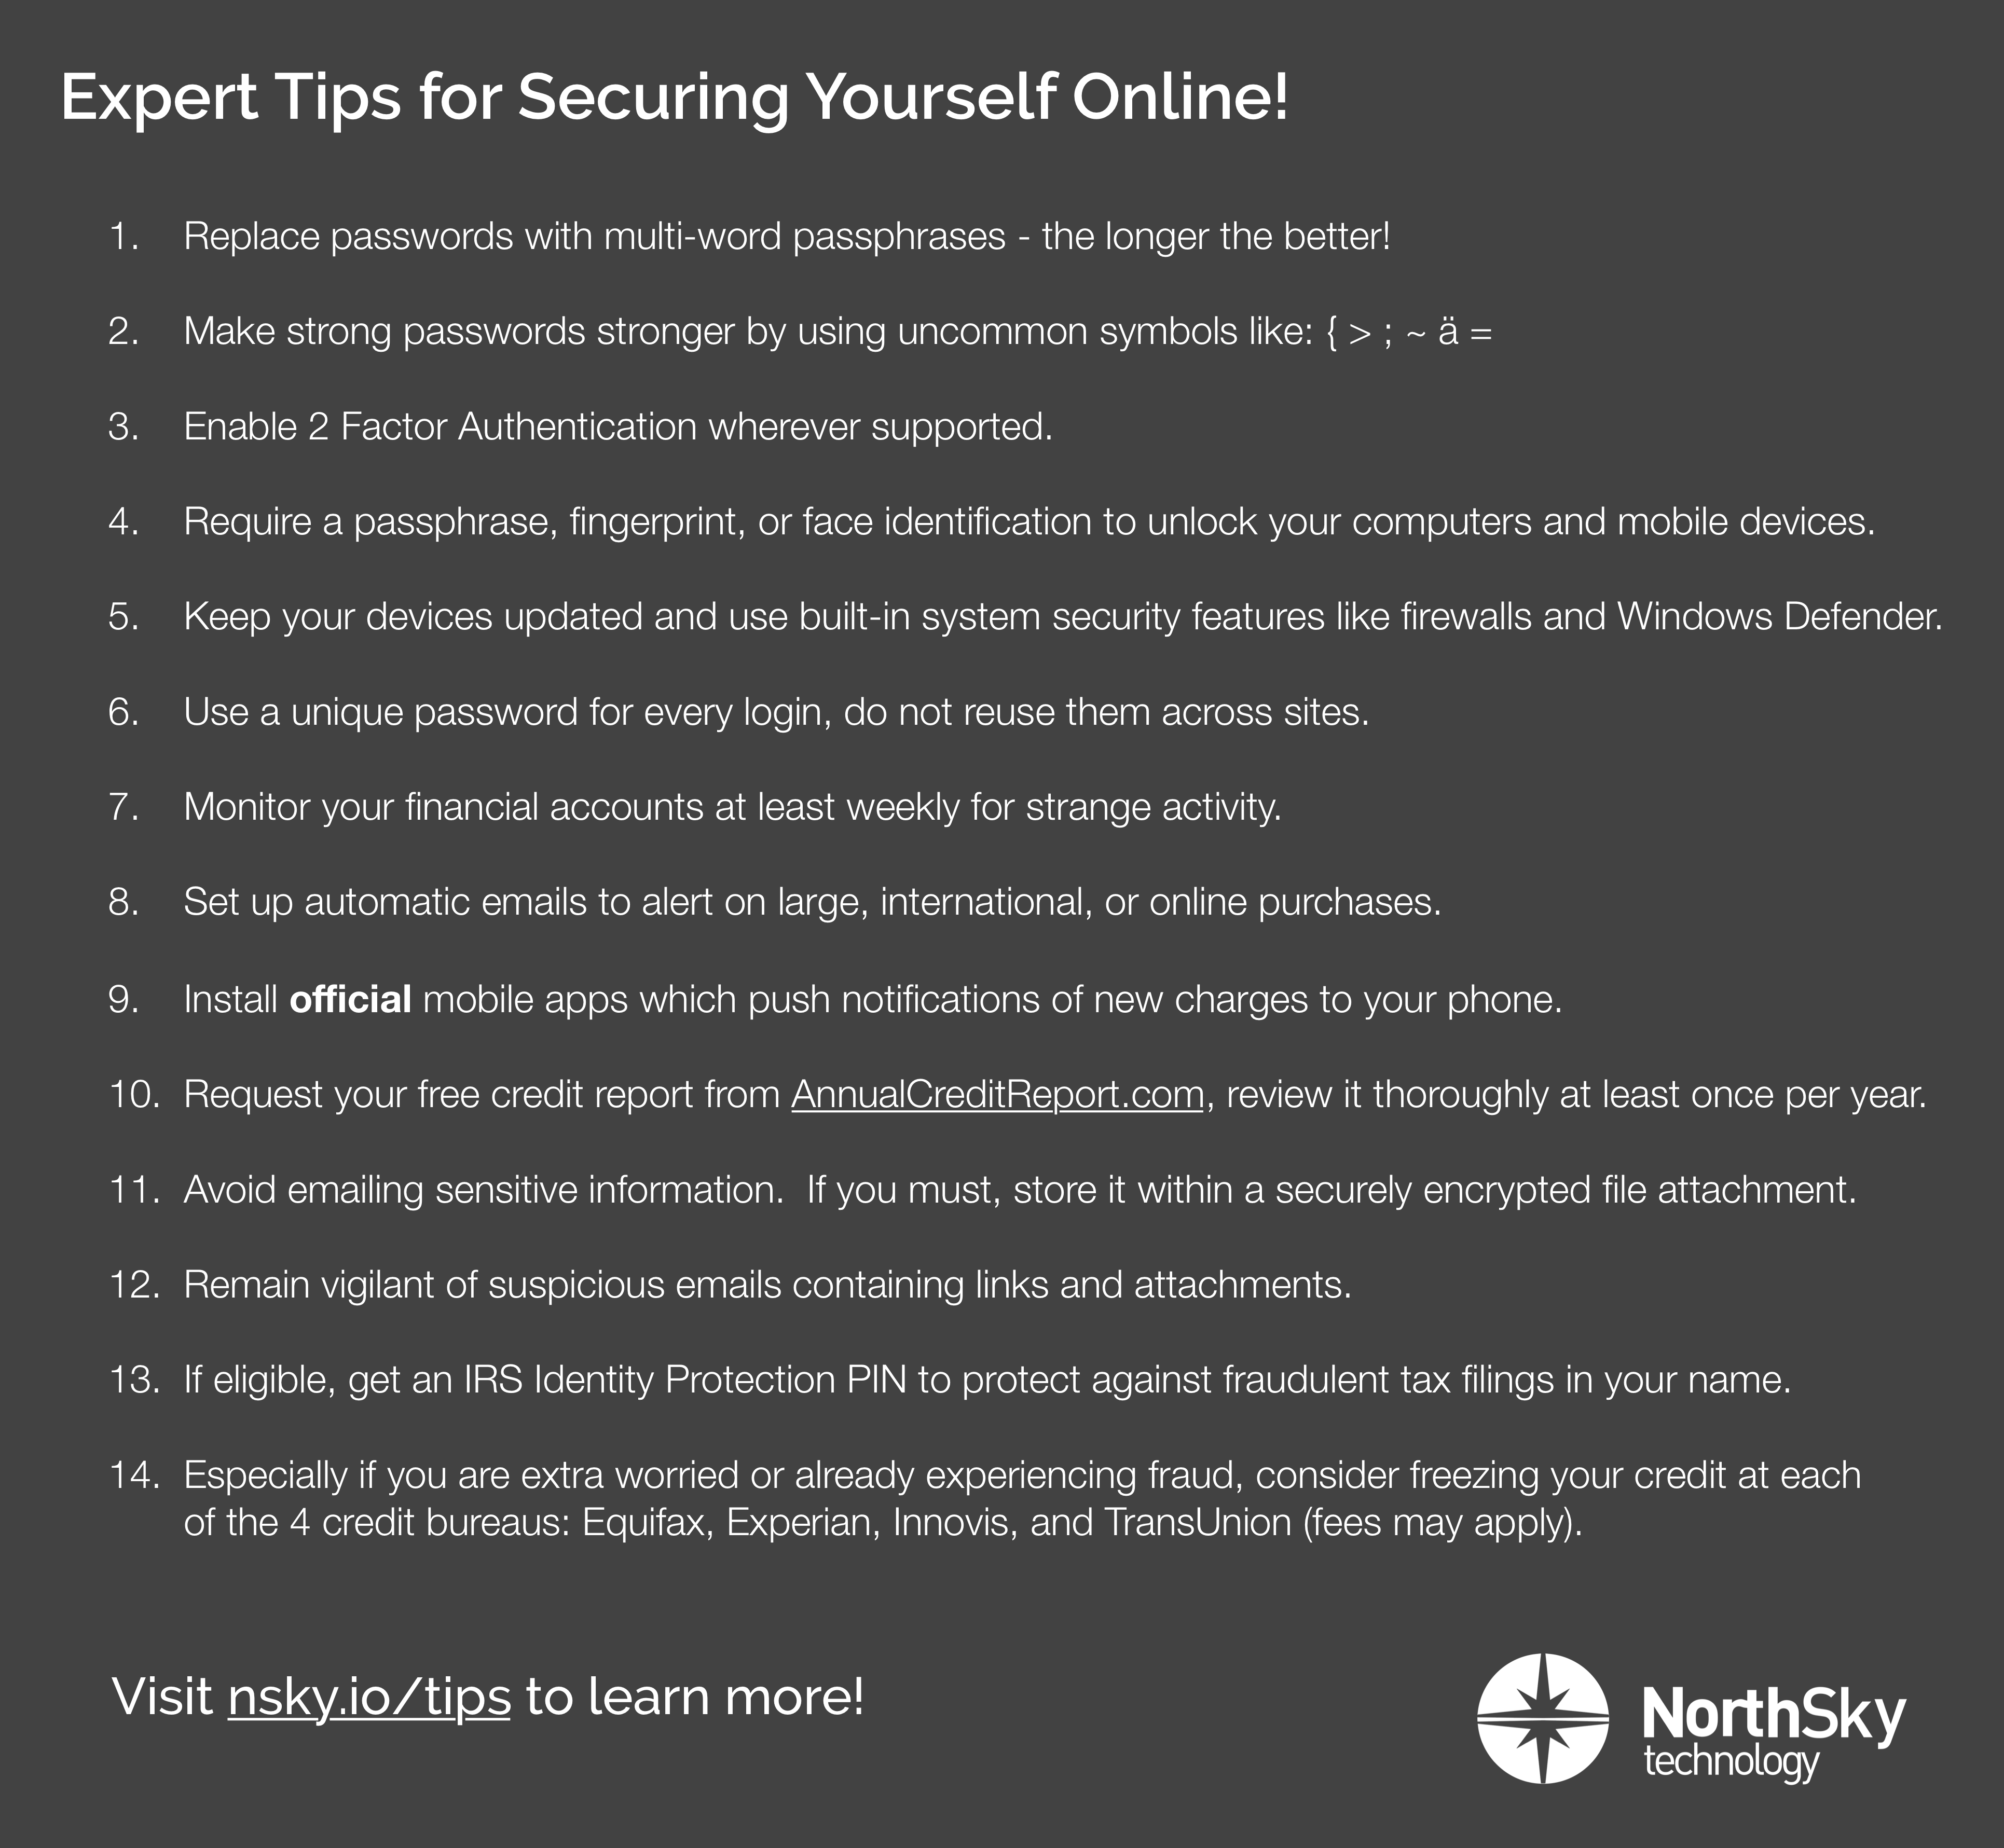 Expert tips for securing yourself online!